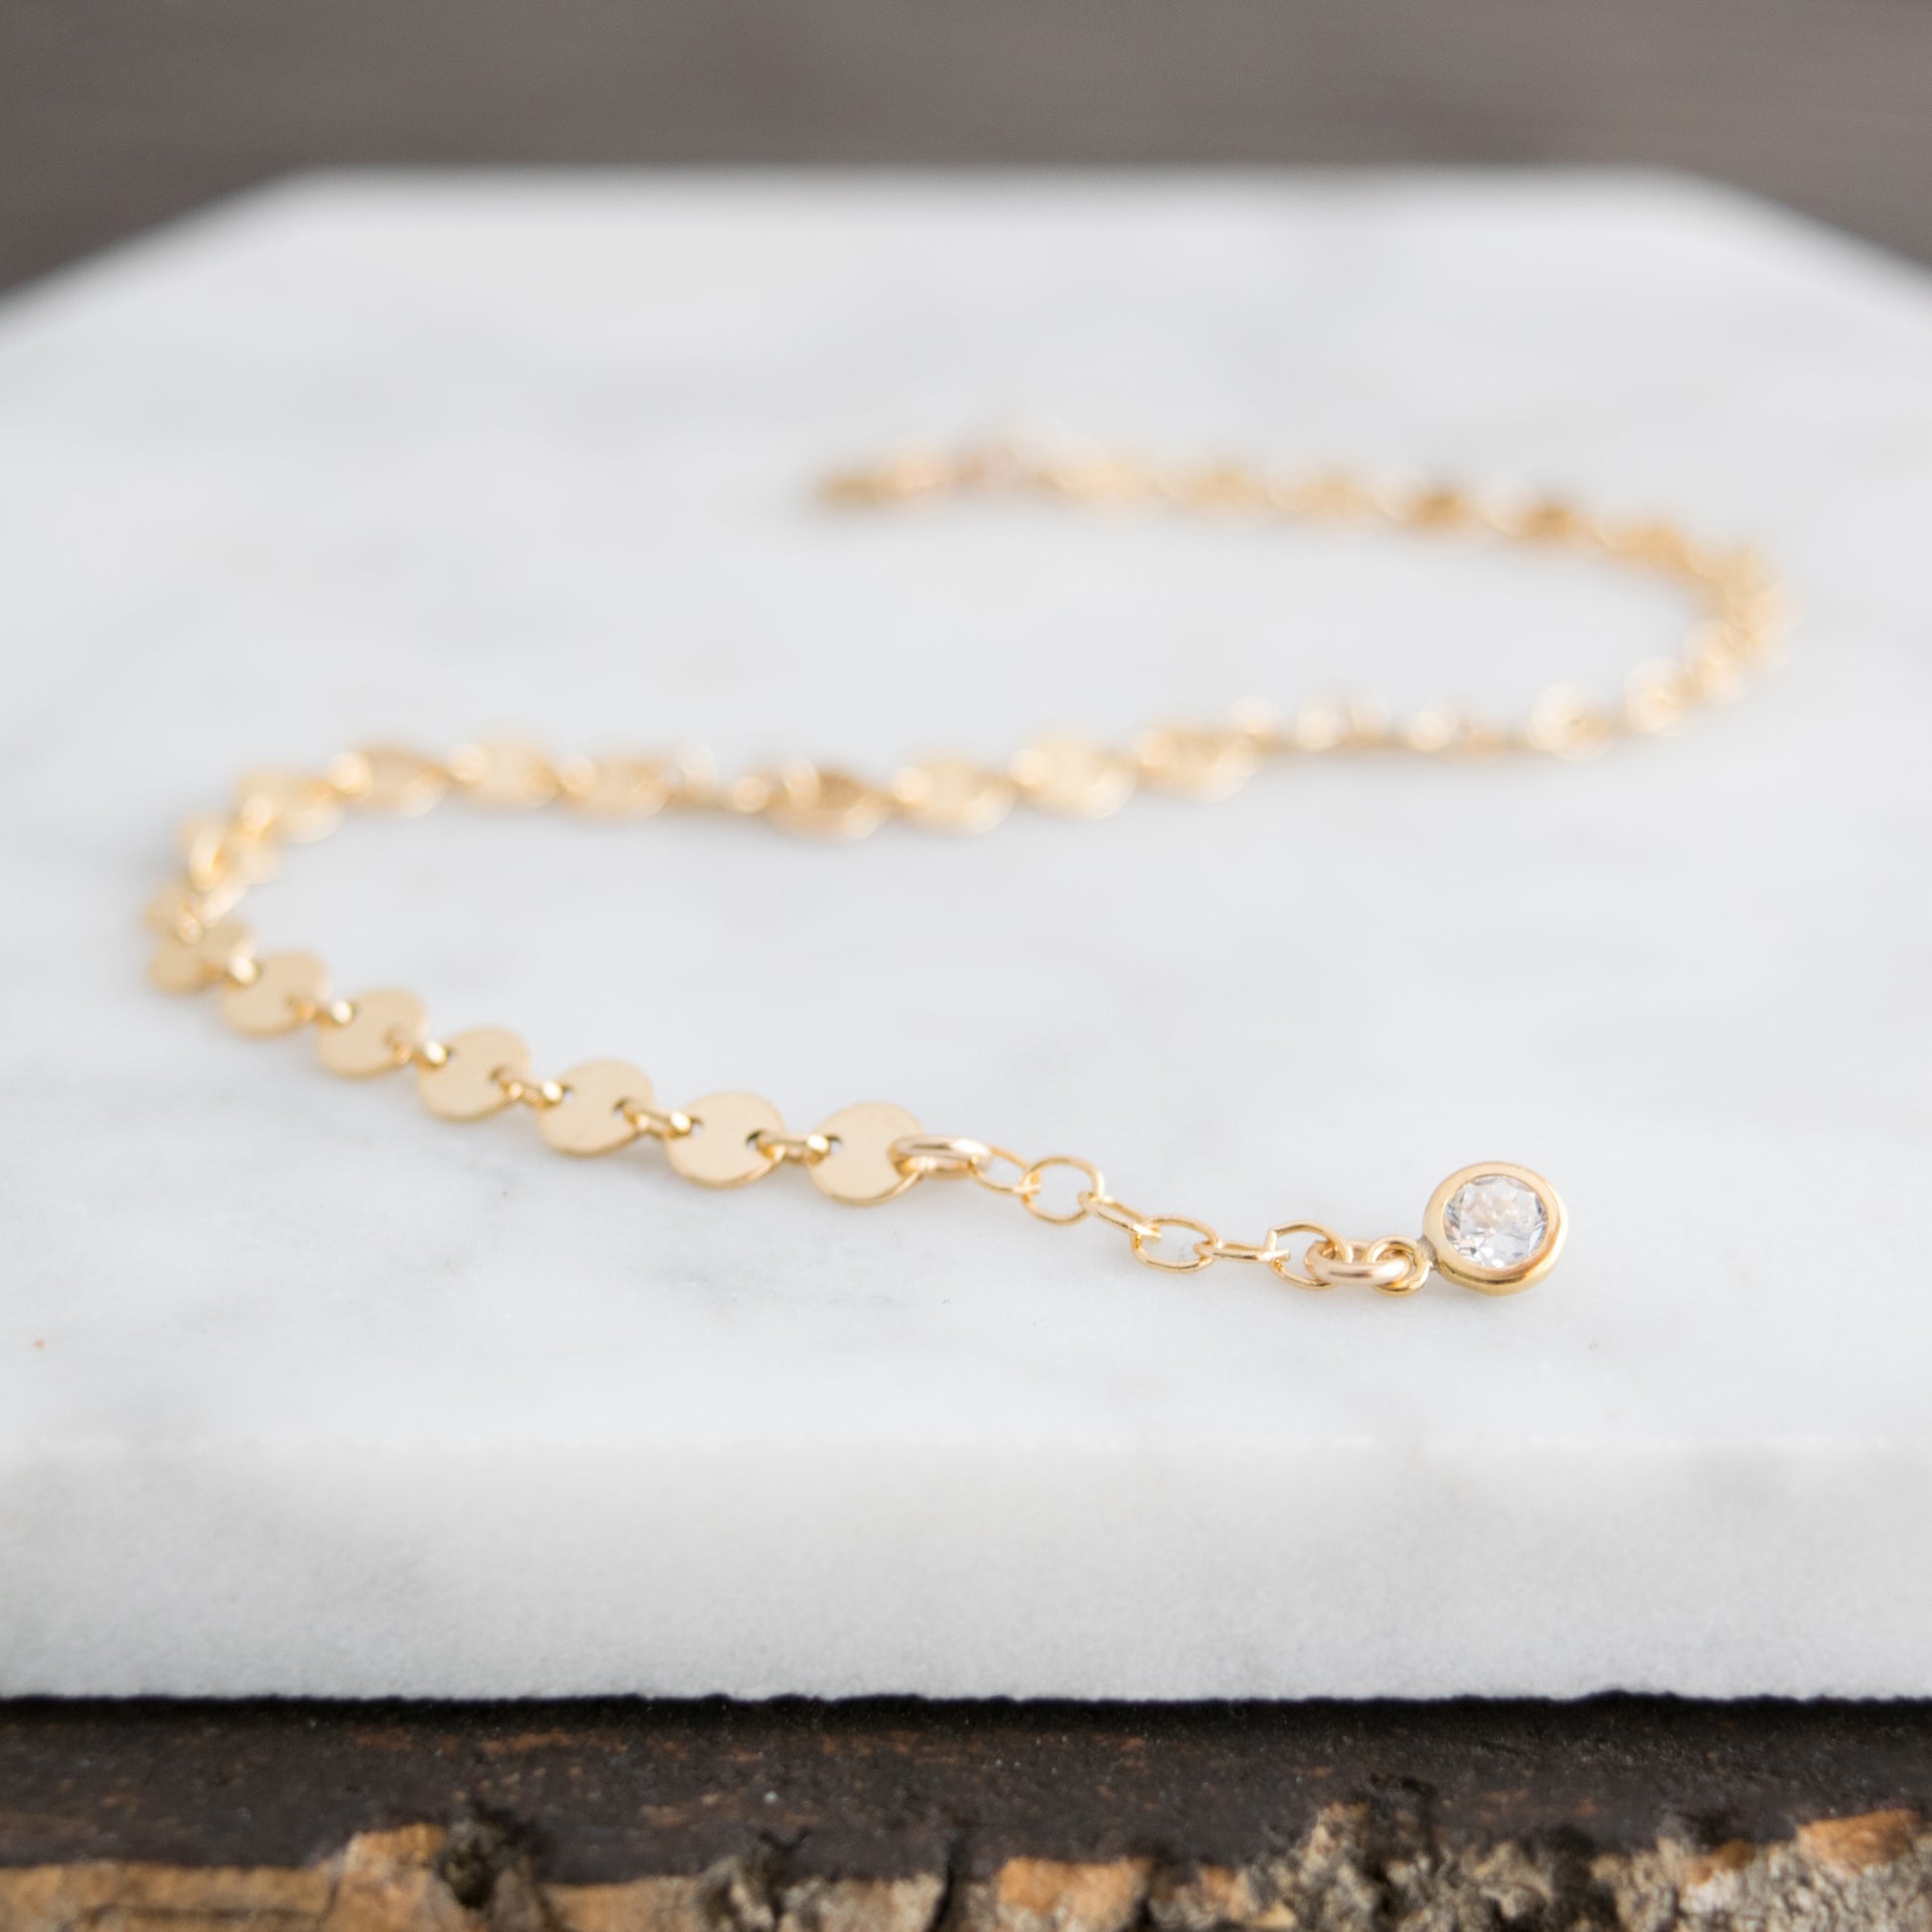 Disc chain bracelet with 1/2" extension in 14k gold-fill with cubiz zirconia charm